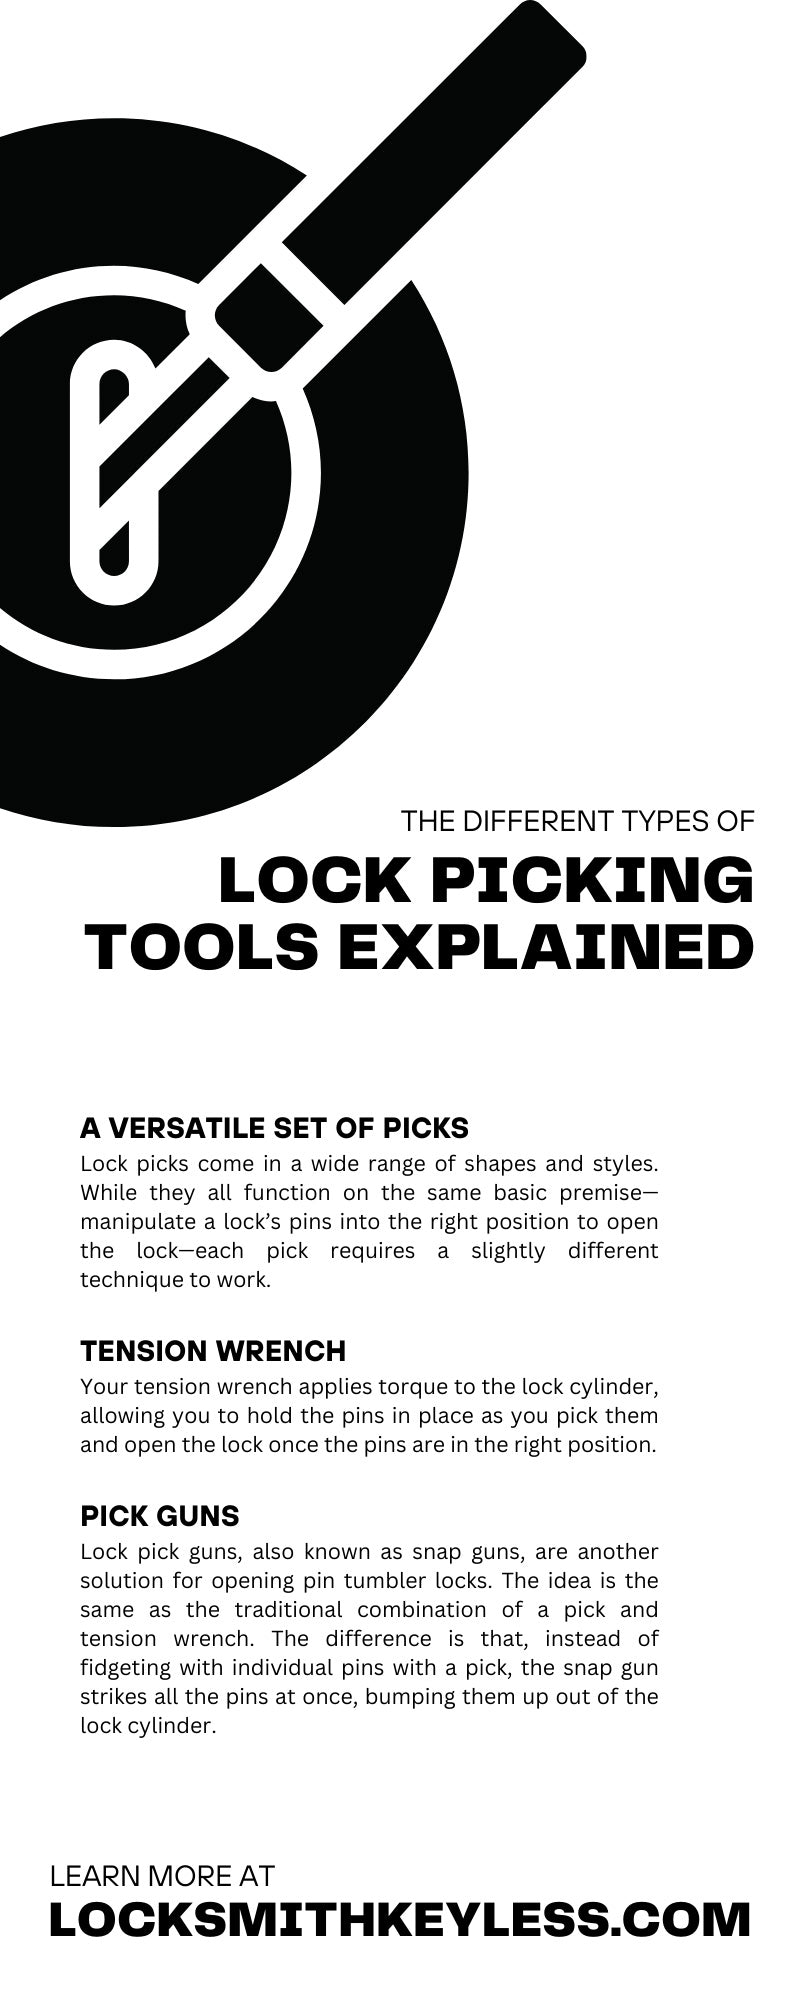 The Different Types of Lock Picking Tools Explained